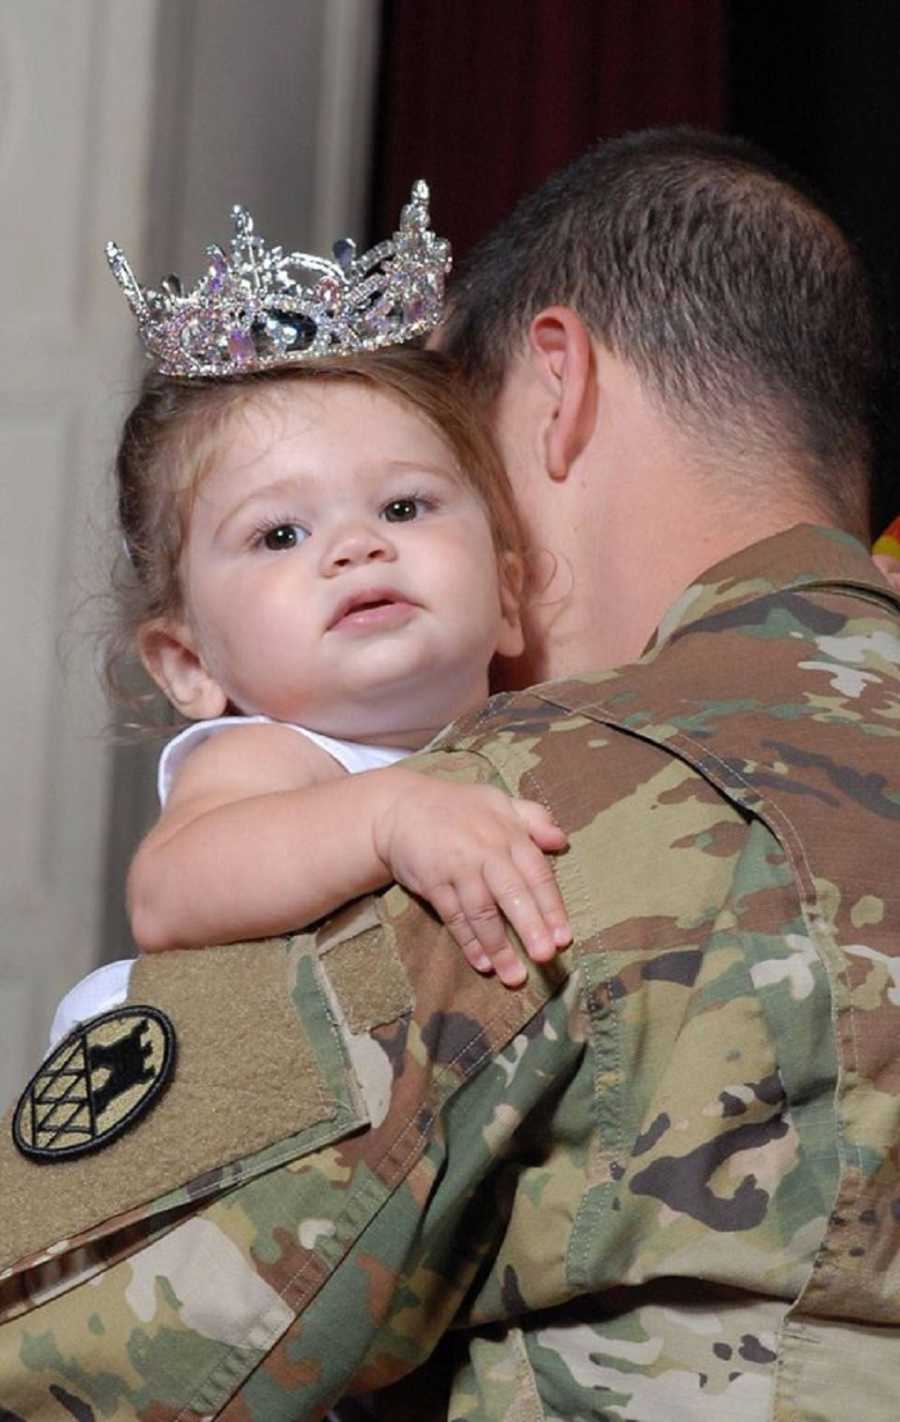 infant with crown on hugs father who is holding her in his uniform